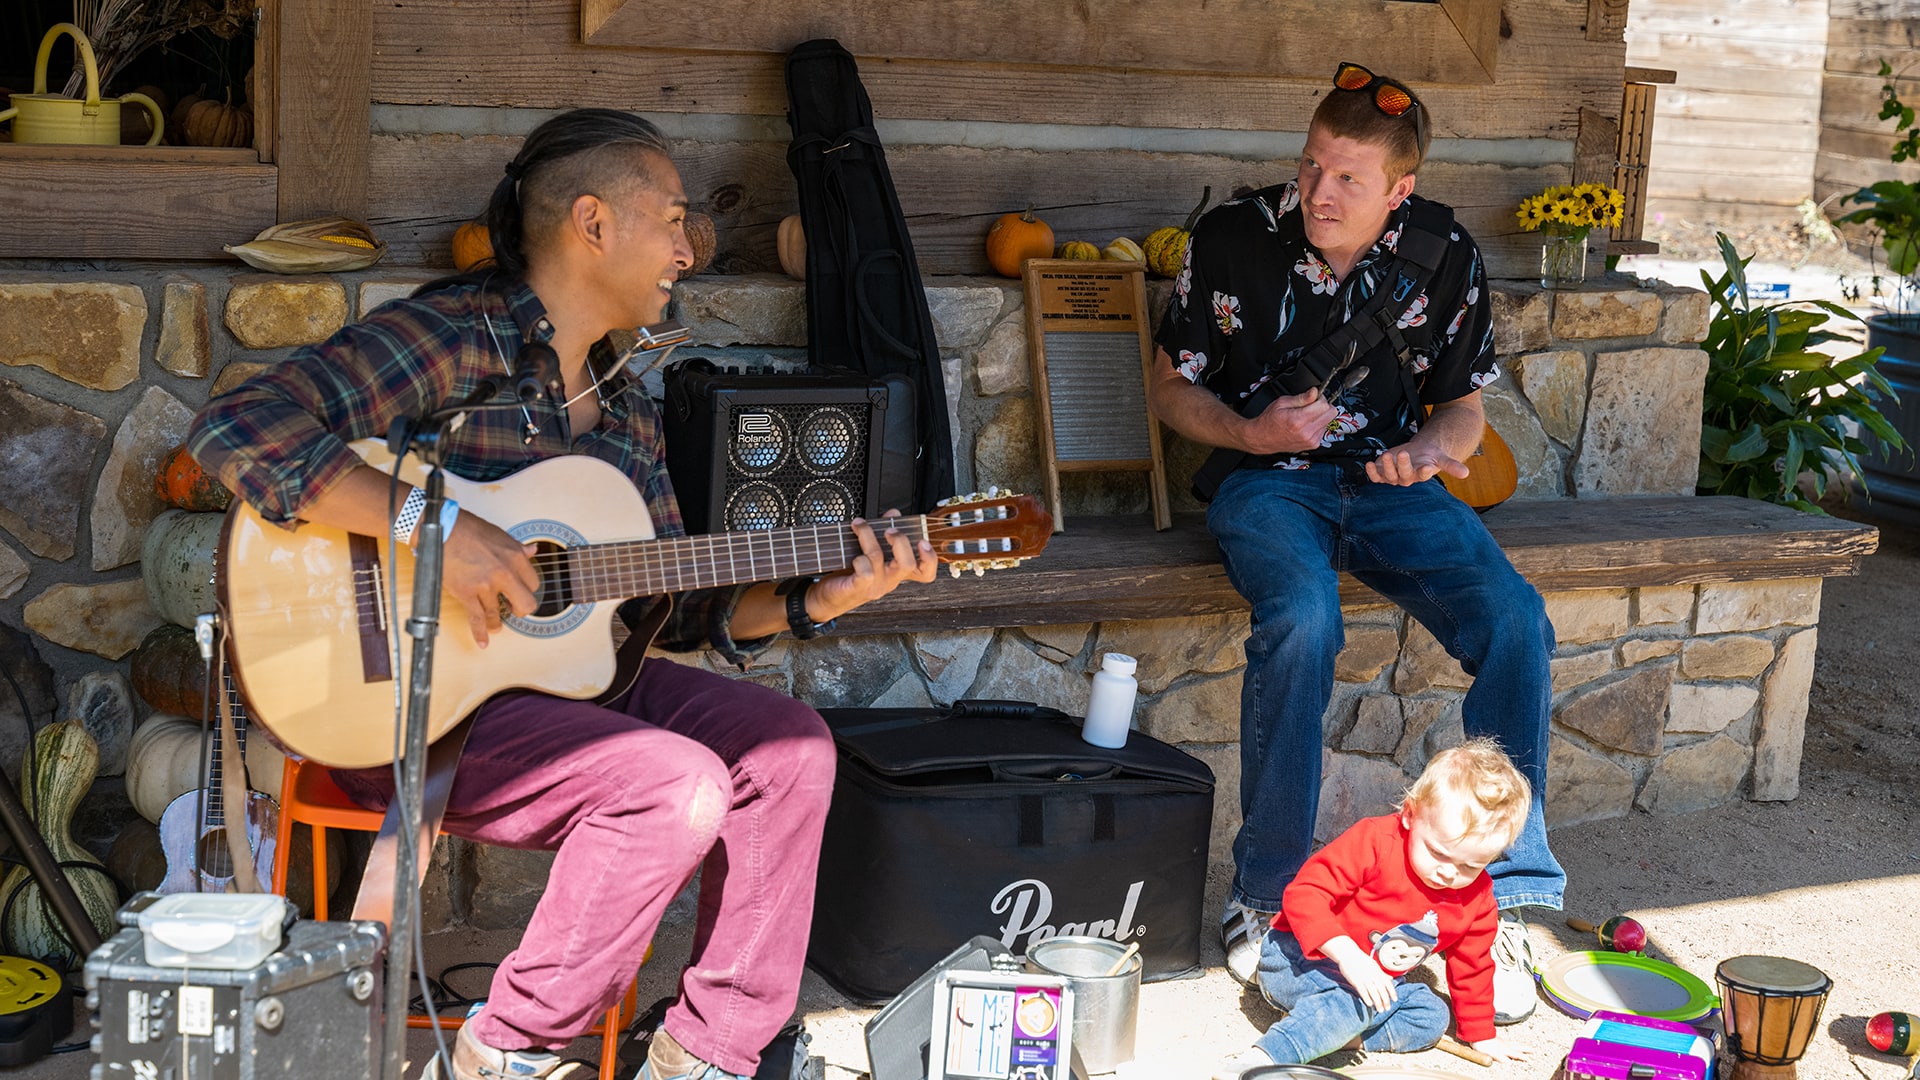 A man with a guitar laughs as another man seated nearby gestures to him and a little boy sits on the ground below.